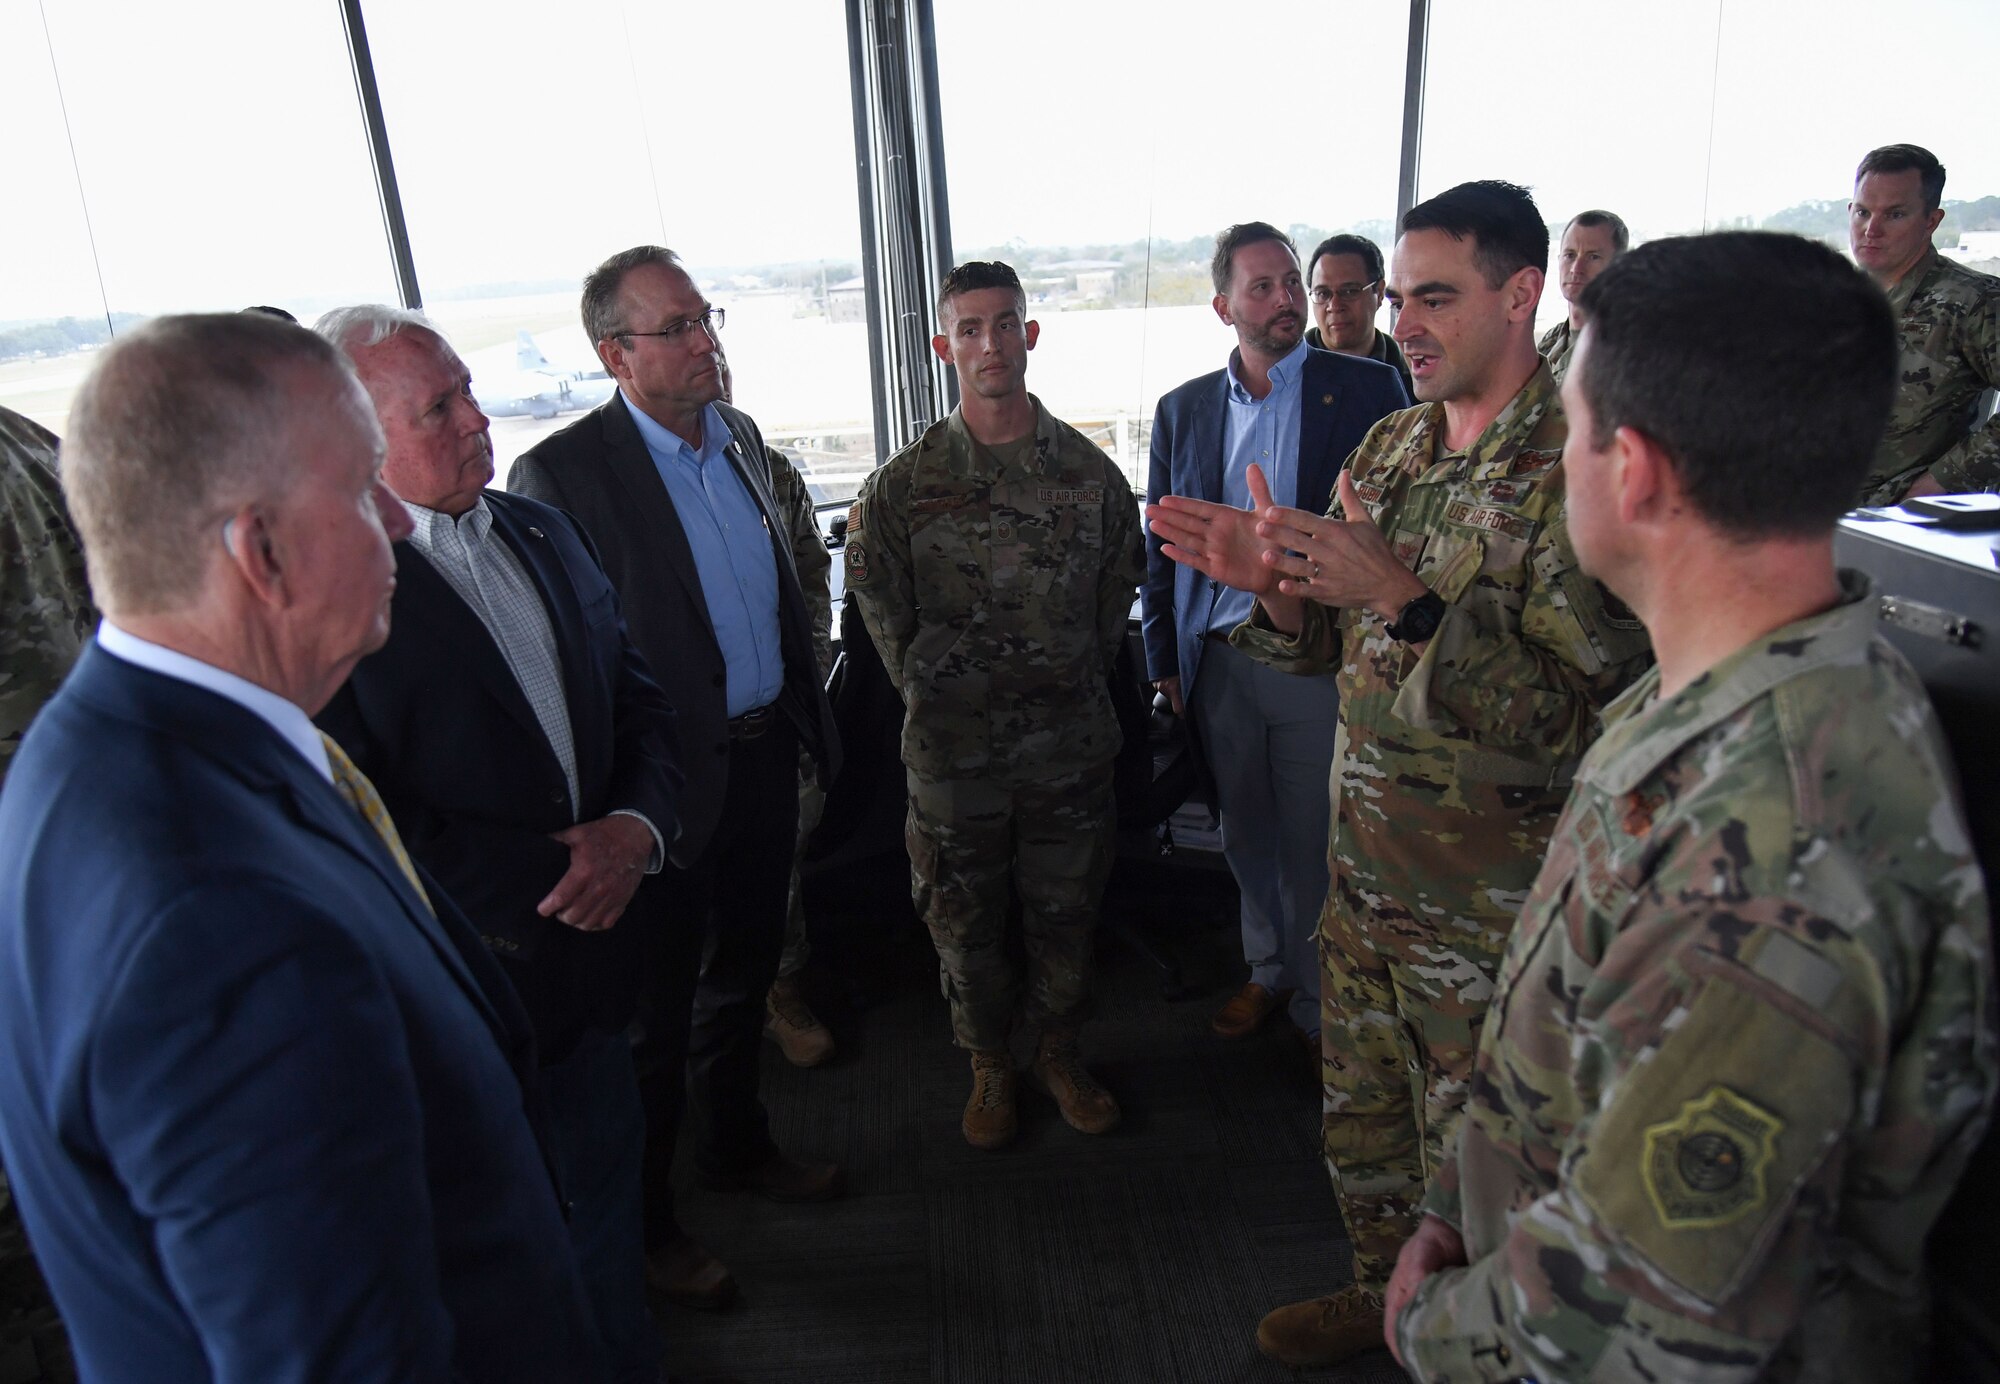 U.S. Air Force Col. Stuart Rubio, 403rd Wing commander, provides an air traffic control tower overview to Congressman Mike Ezell, South Mississippi 4th Congressional District representative, and his staff, during an immersion tour at Keesler Air Force Base, Mississippi, Feb. 15, 2023.